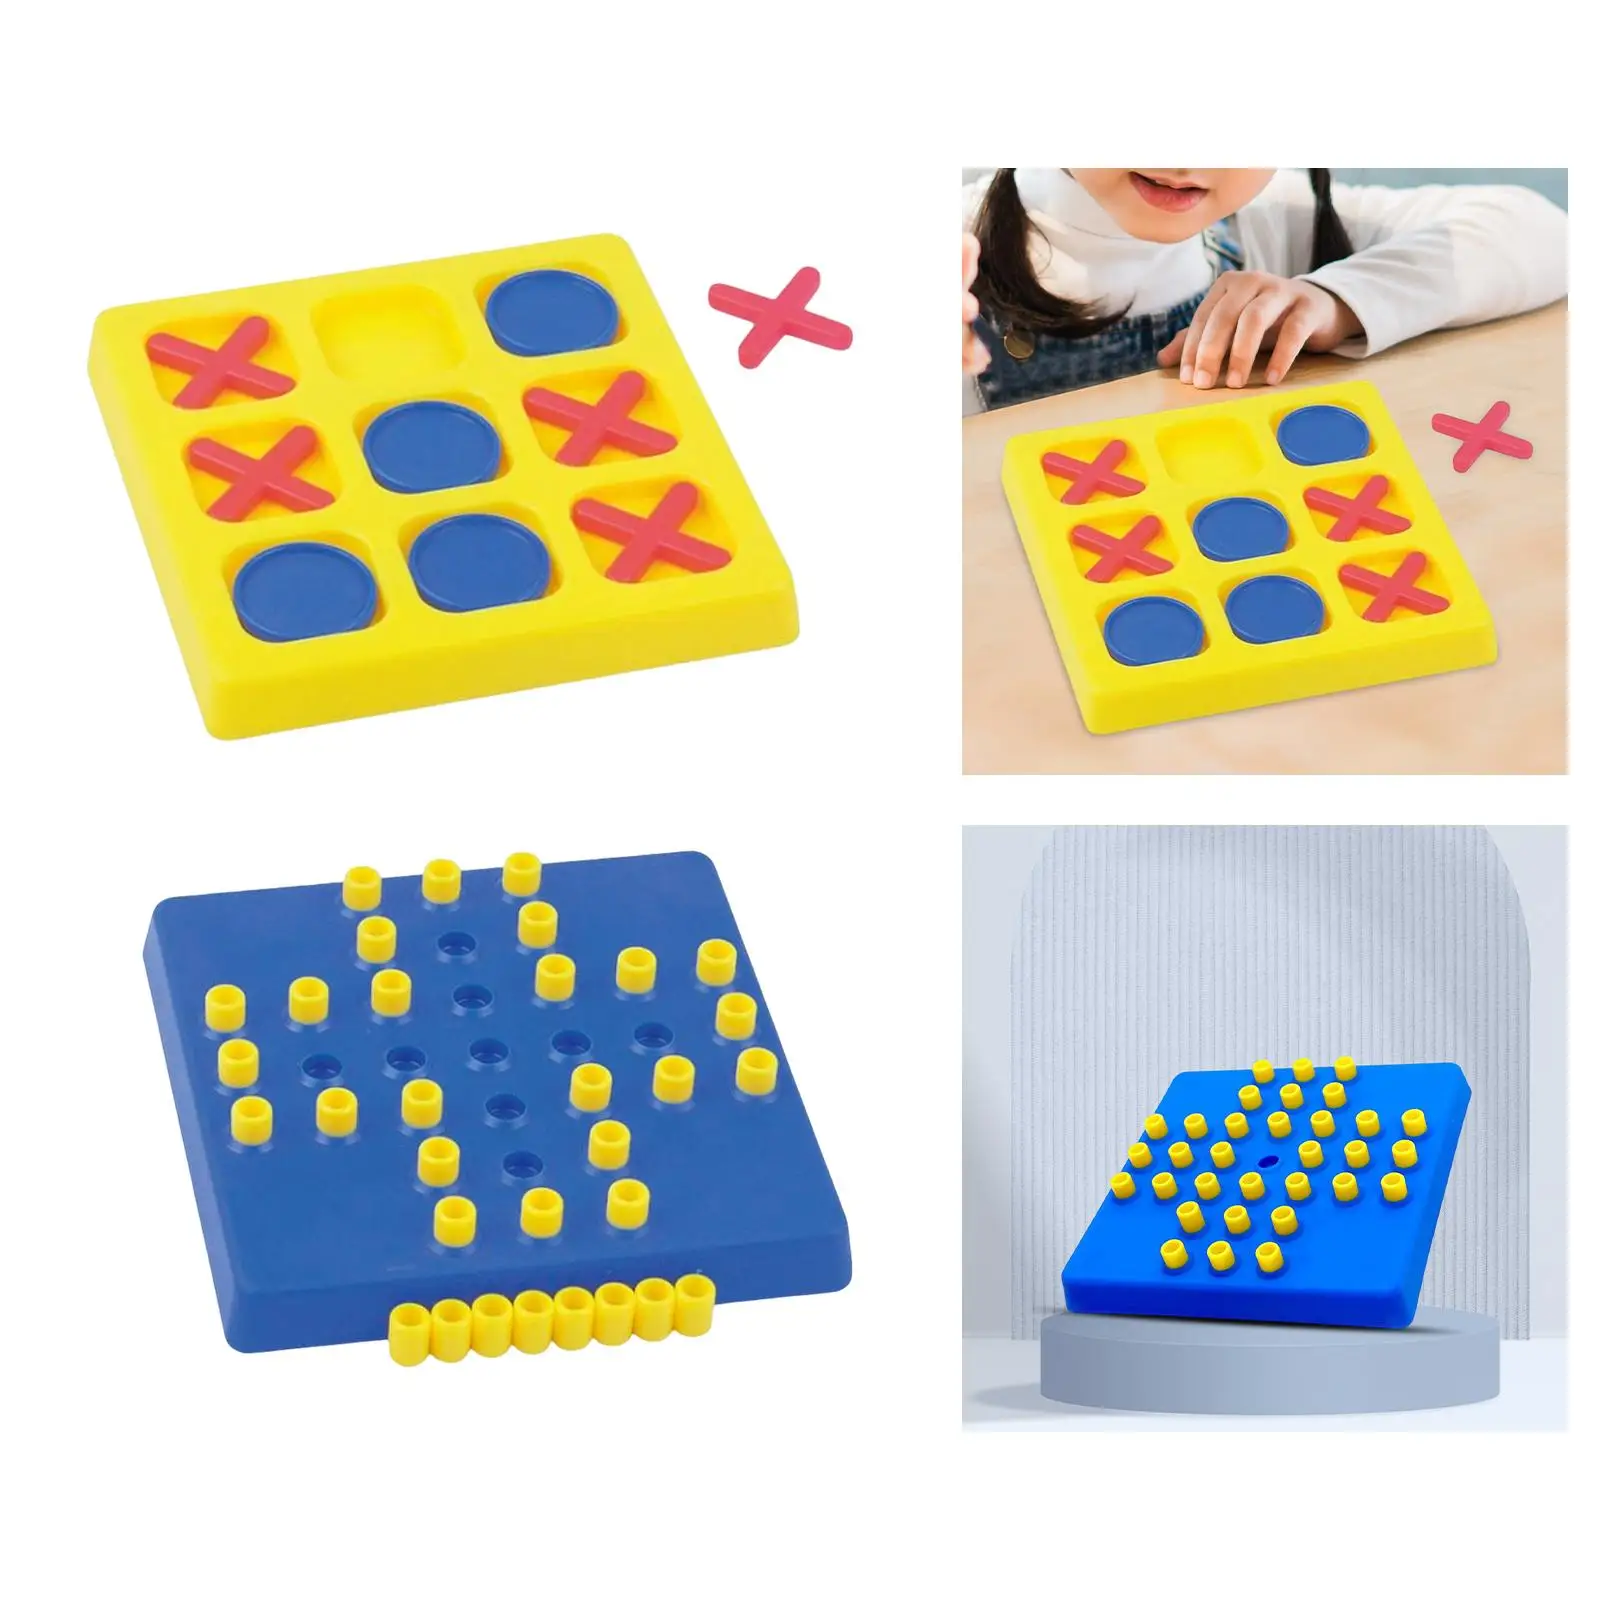 Marble Solitaire Board Game Tabletop Decor Tic TAC Toe Game for Outdoor